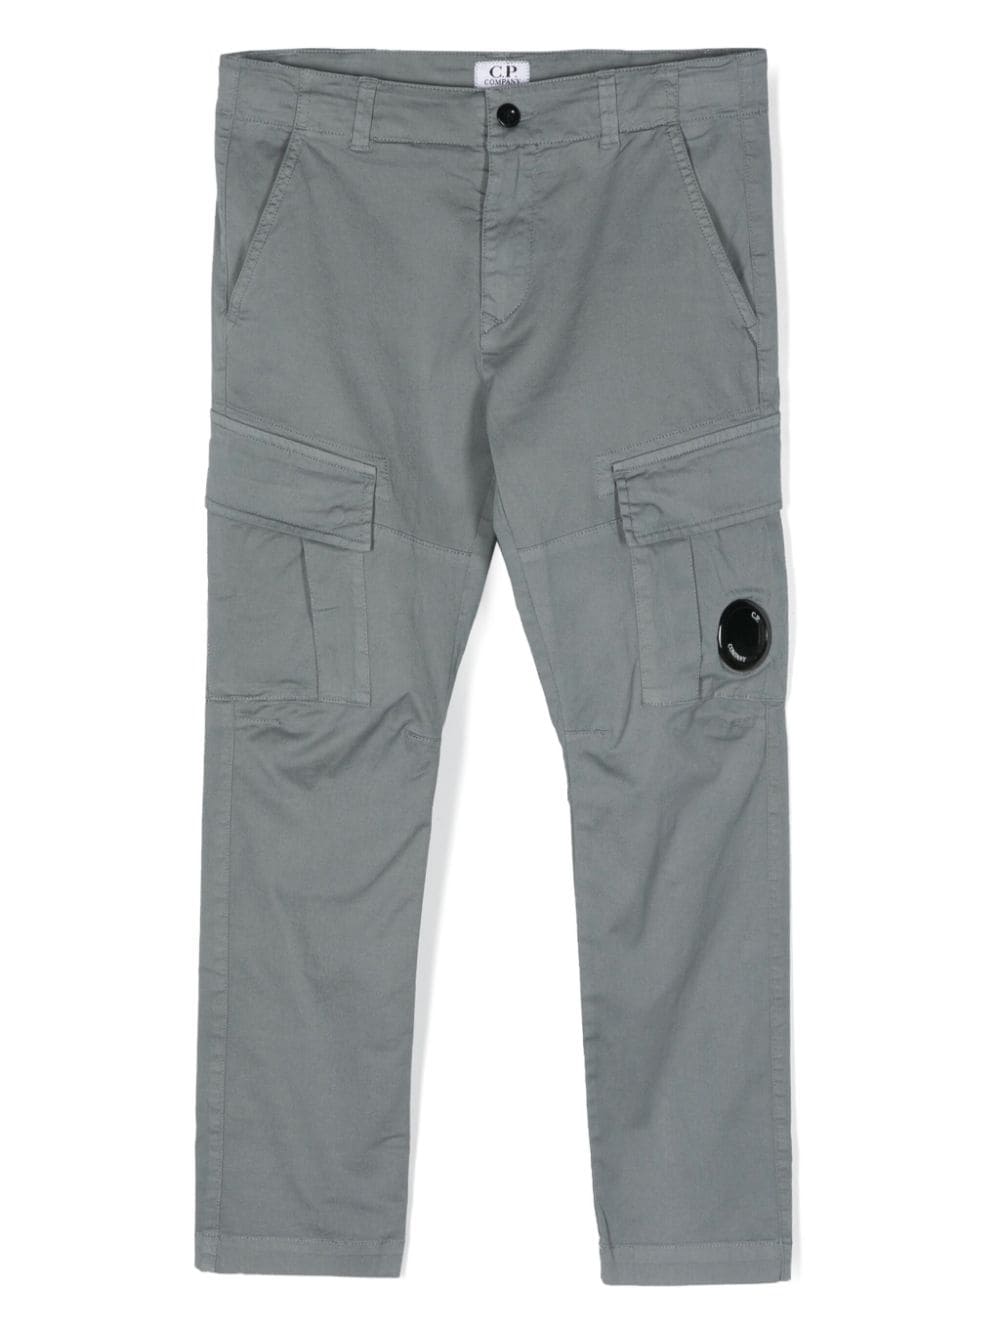 Steel blue trousers for boys with logo